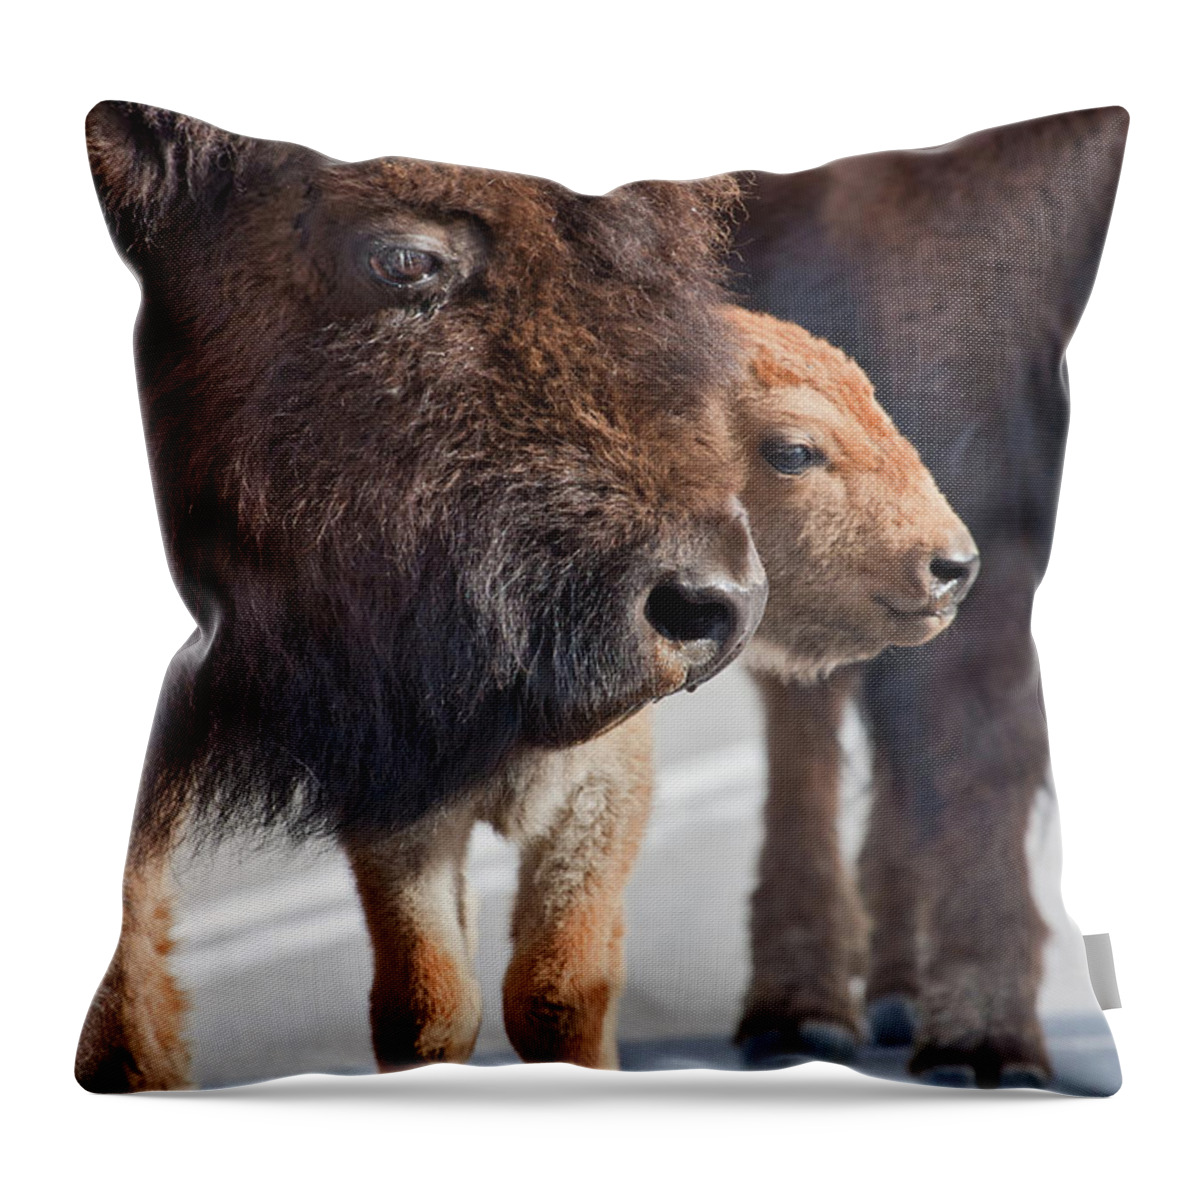 Buffalo Throw Pillow featuring the photograph Bison Family by Wesley Aston